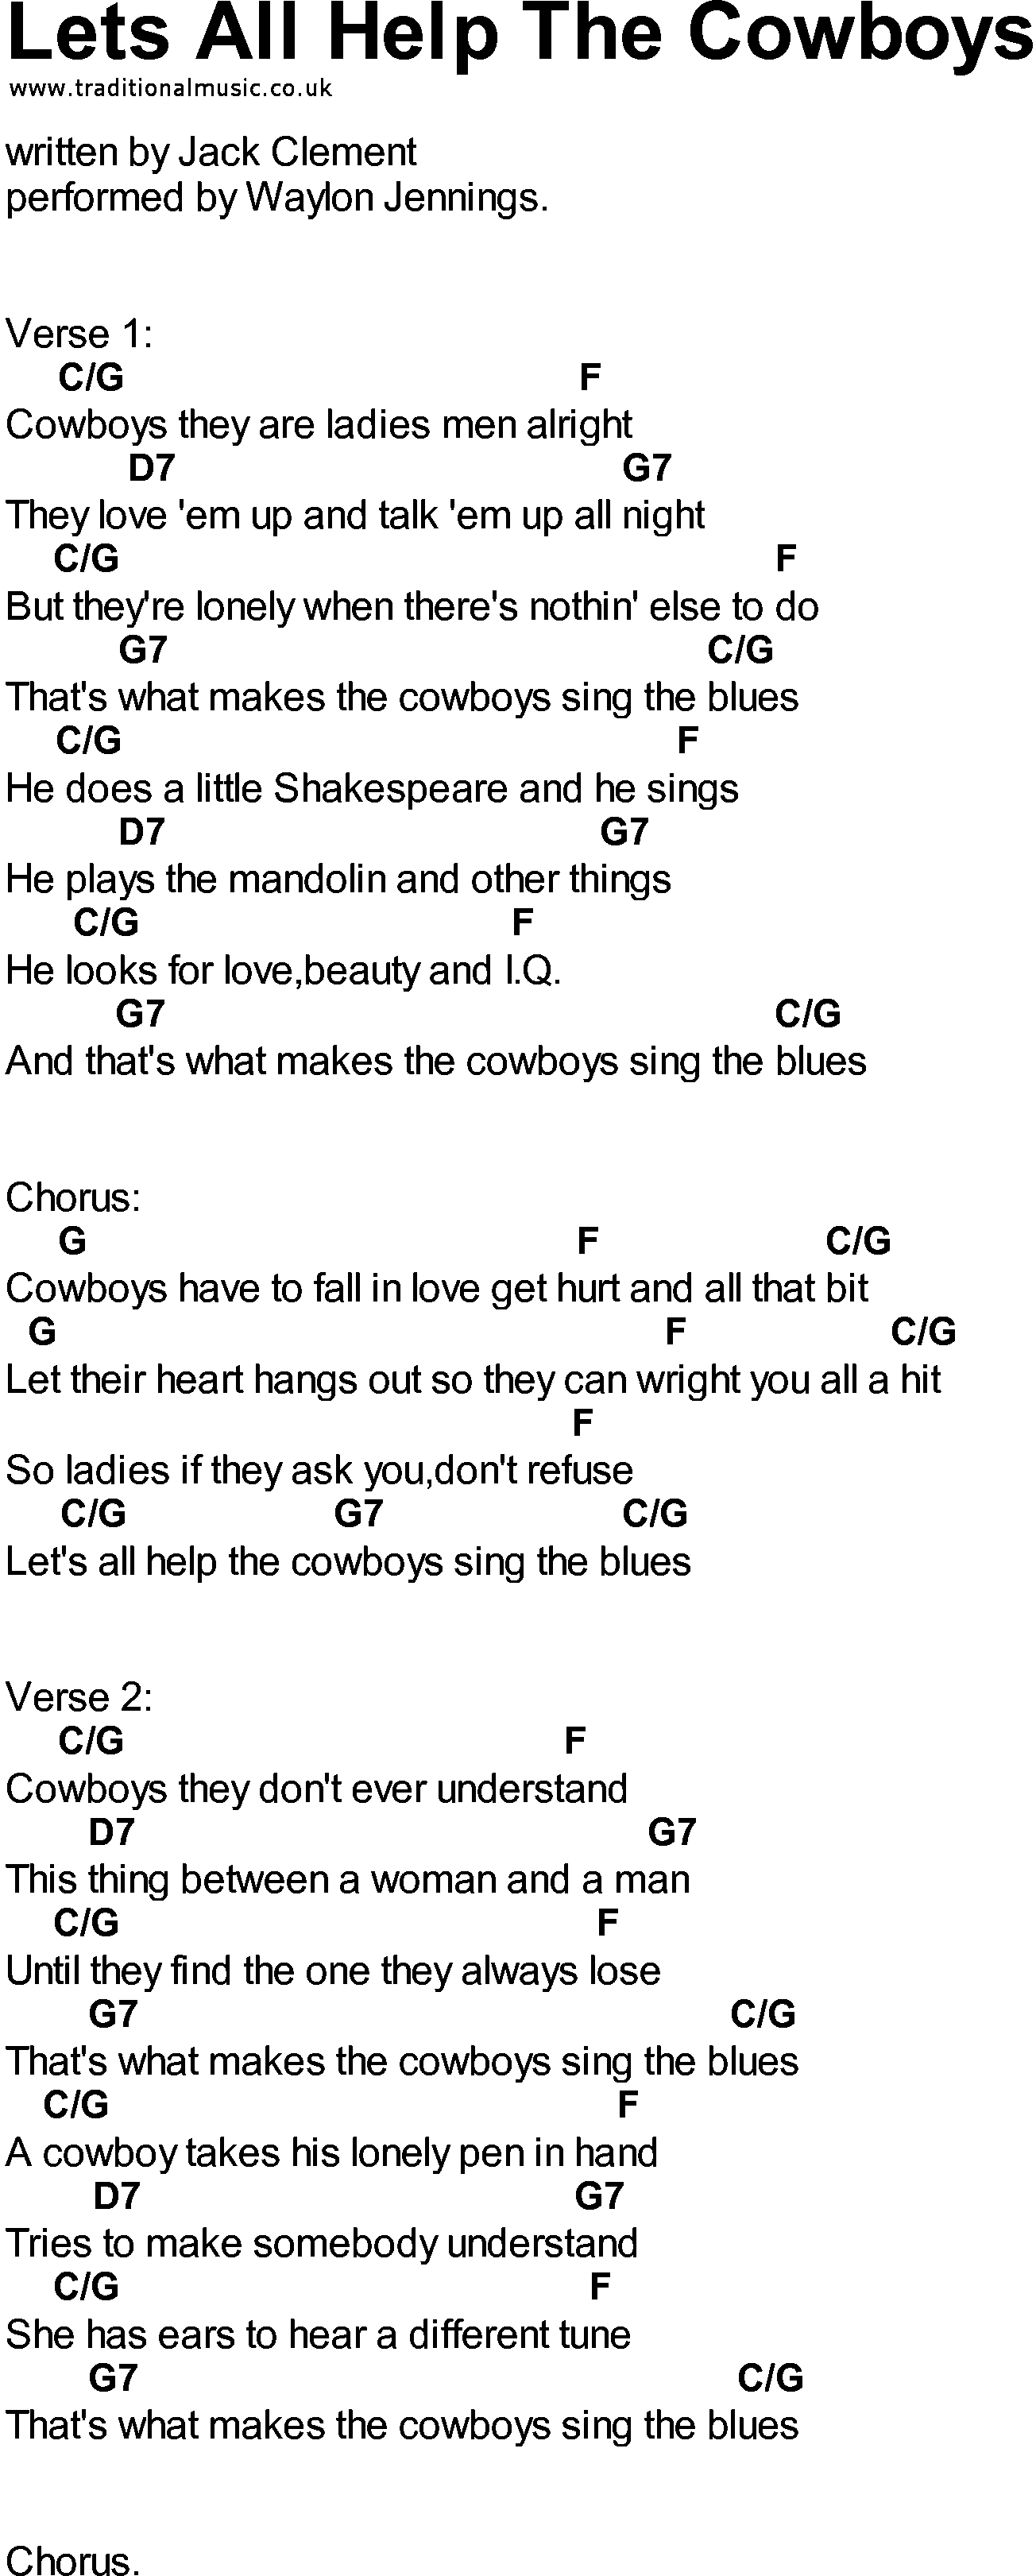 Bluegrass songs with chords - Lets All Help The Cowboys